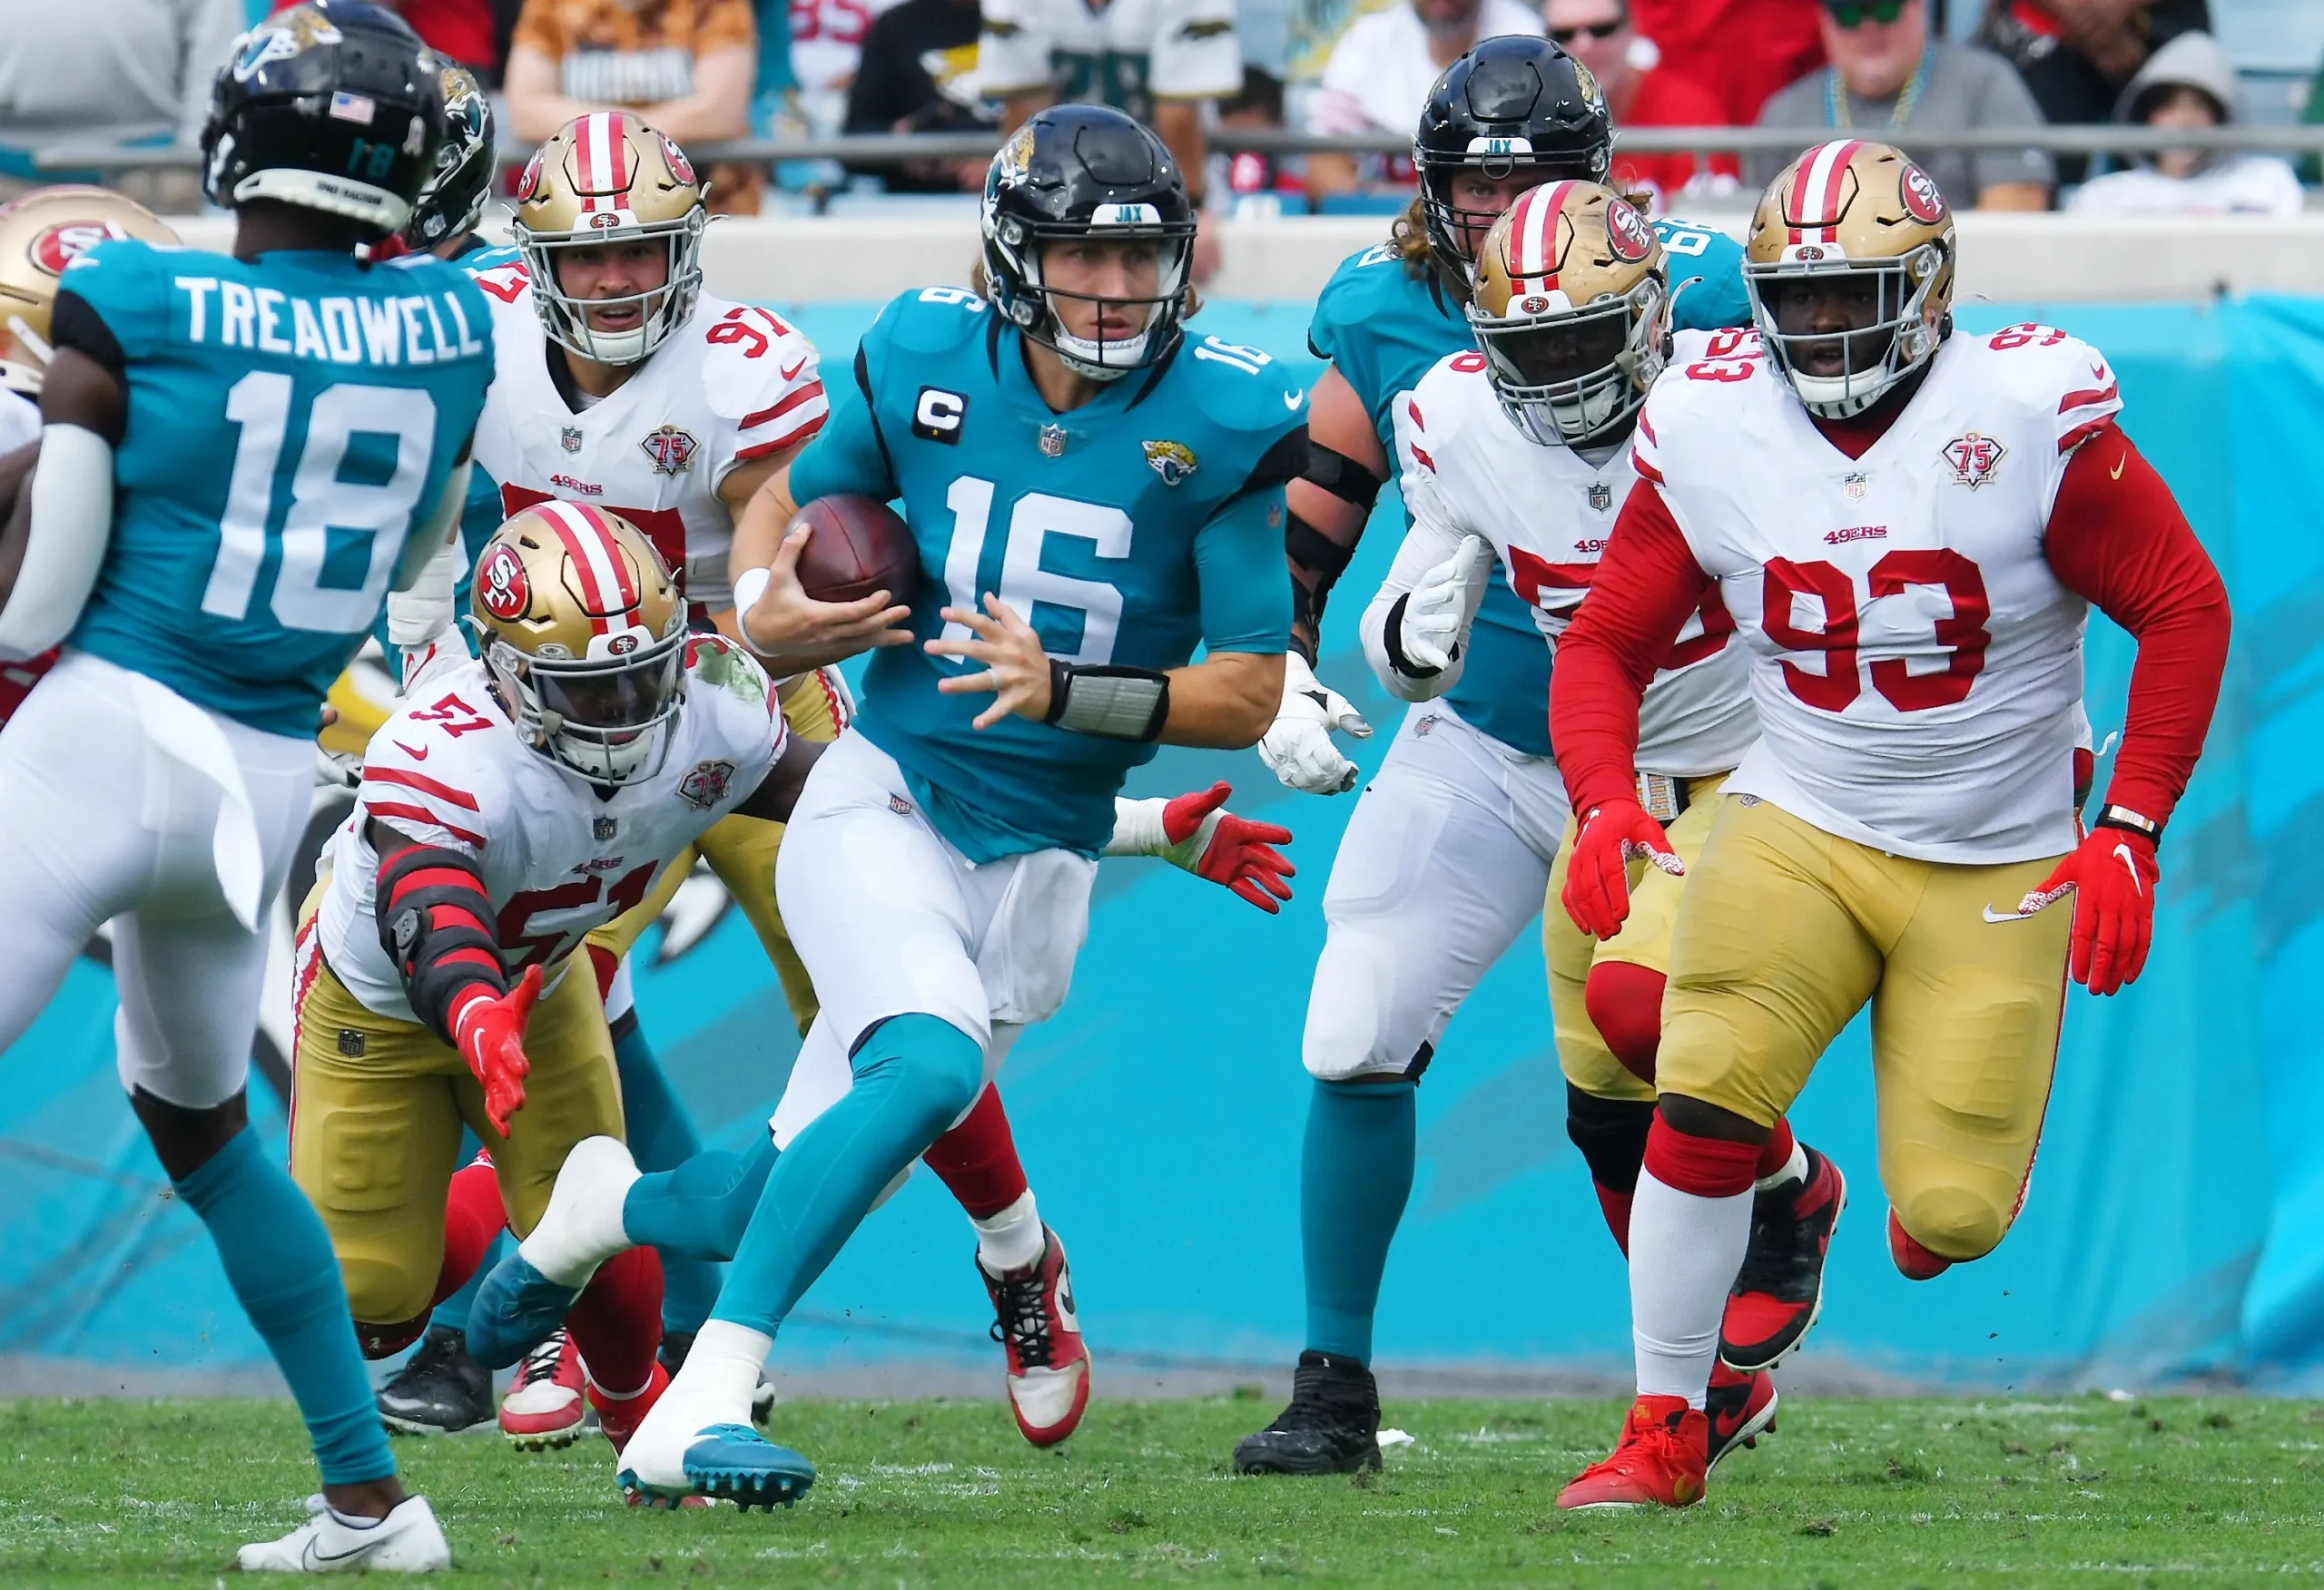 Jaguars vs. 49ers Preview and Betting Odds